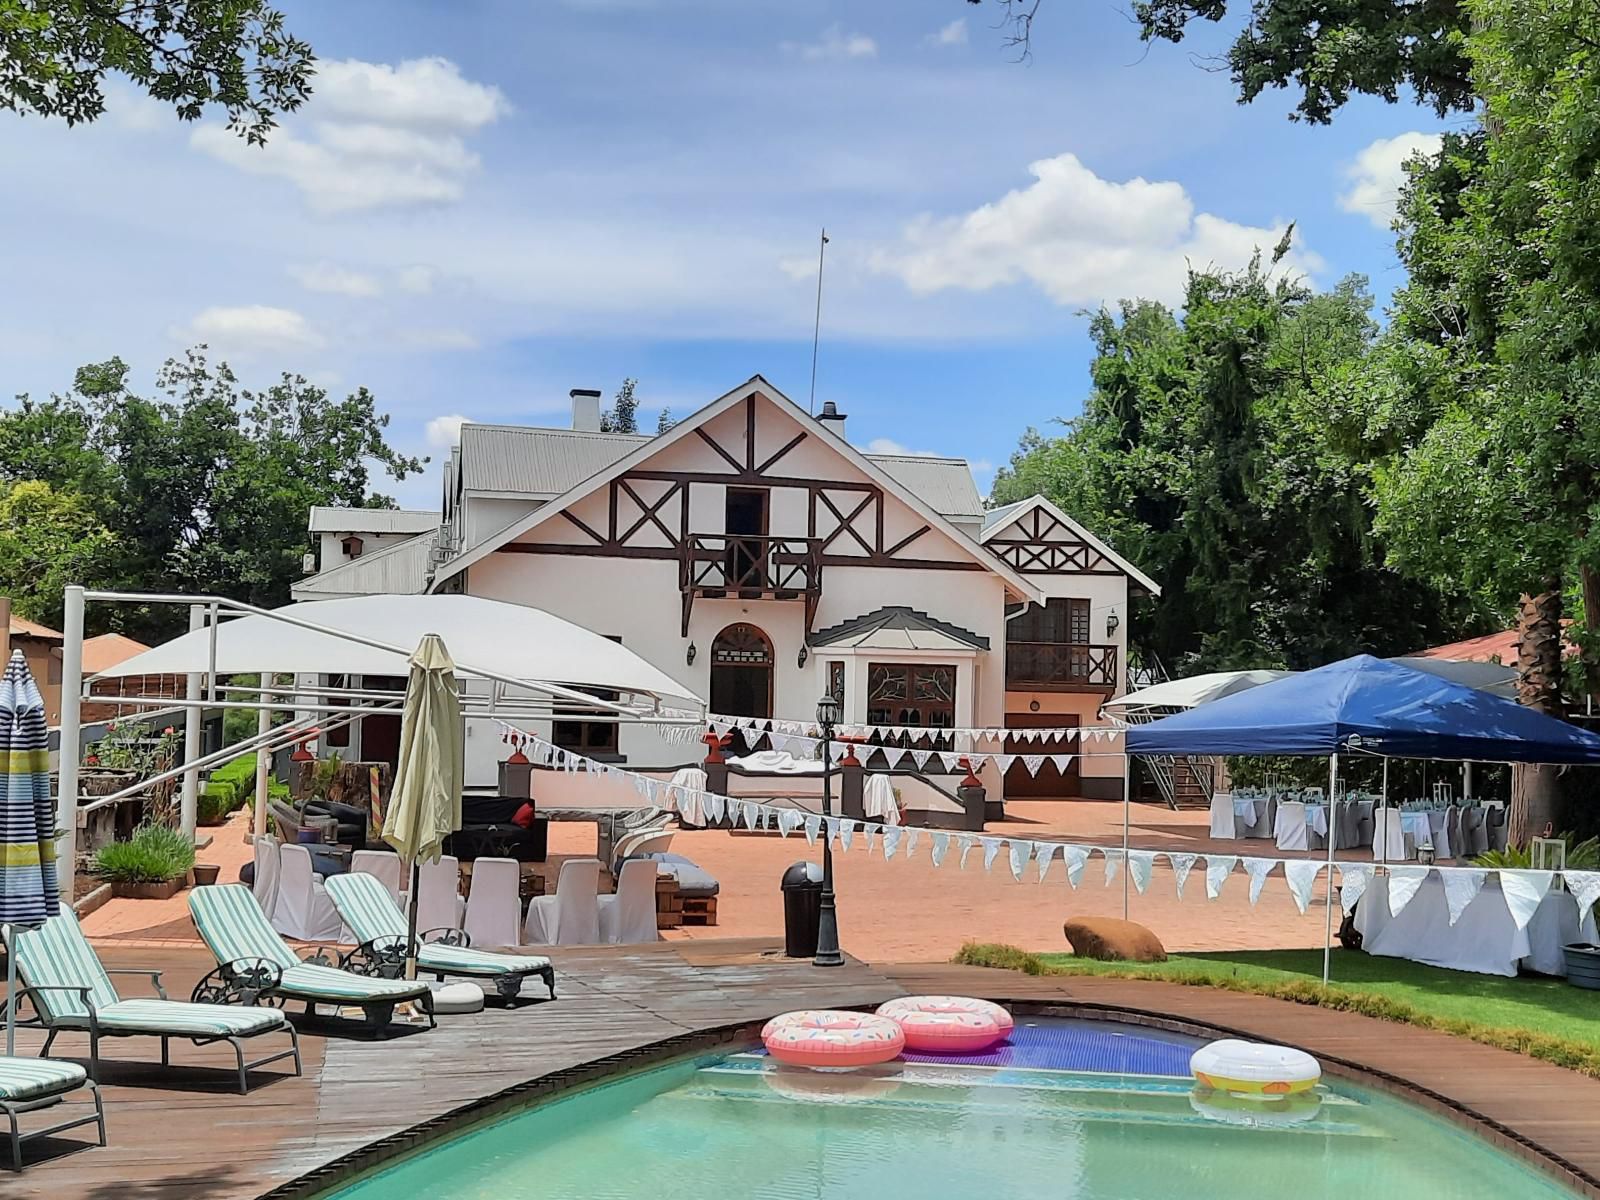 The Oak Potch Guesthouse Die Bult Potchefstroom North West Province South Africa Swimming Pool